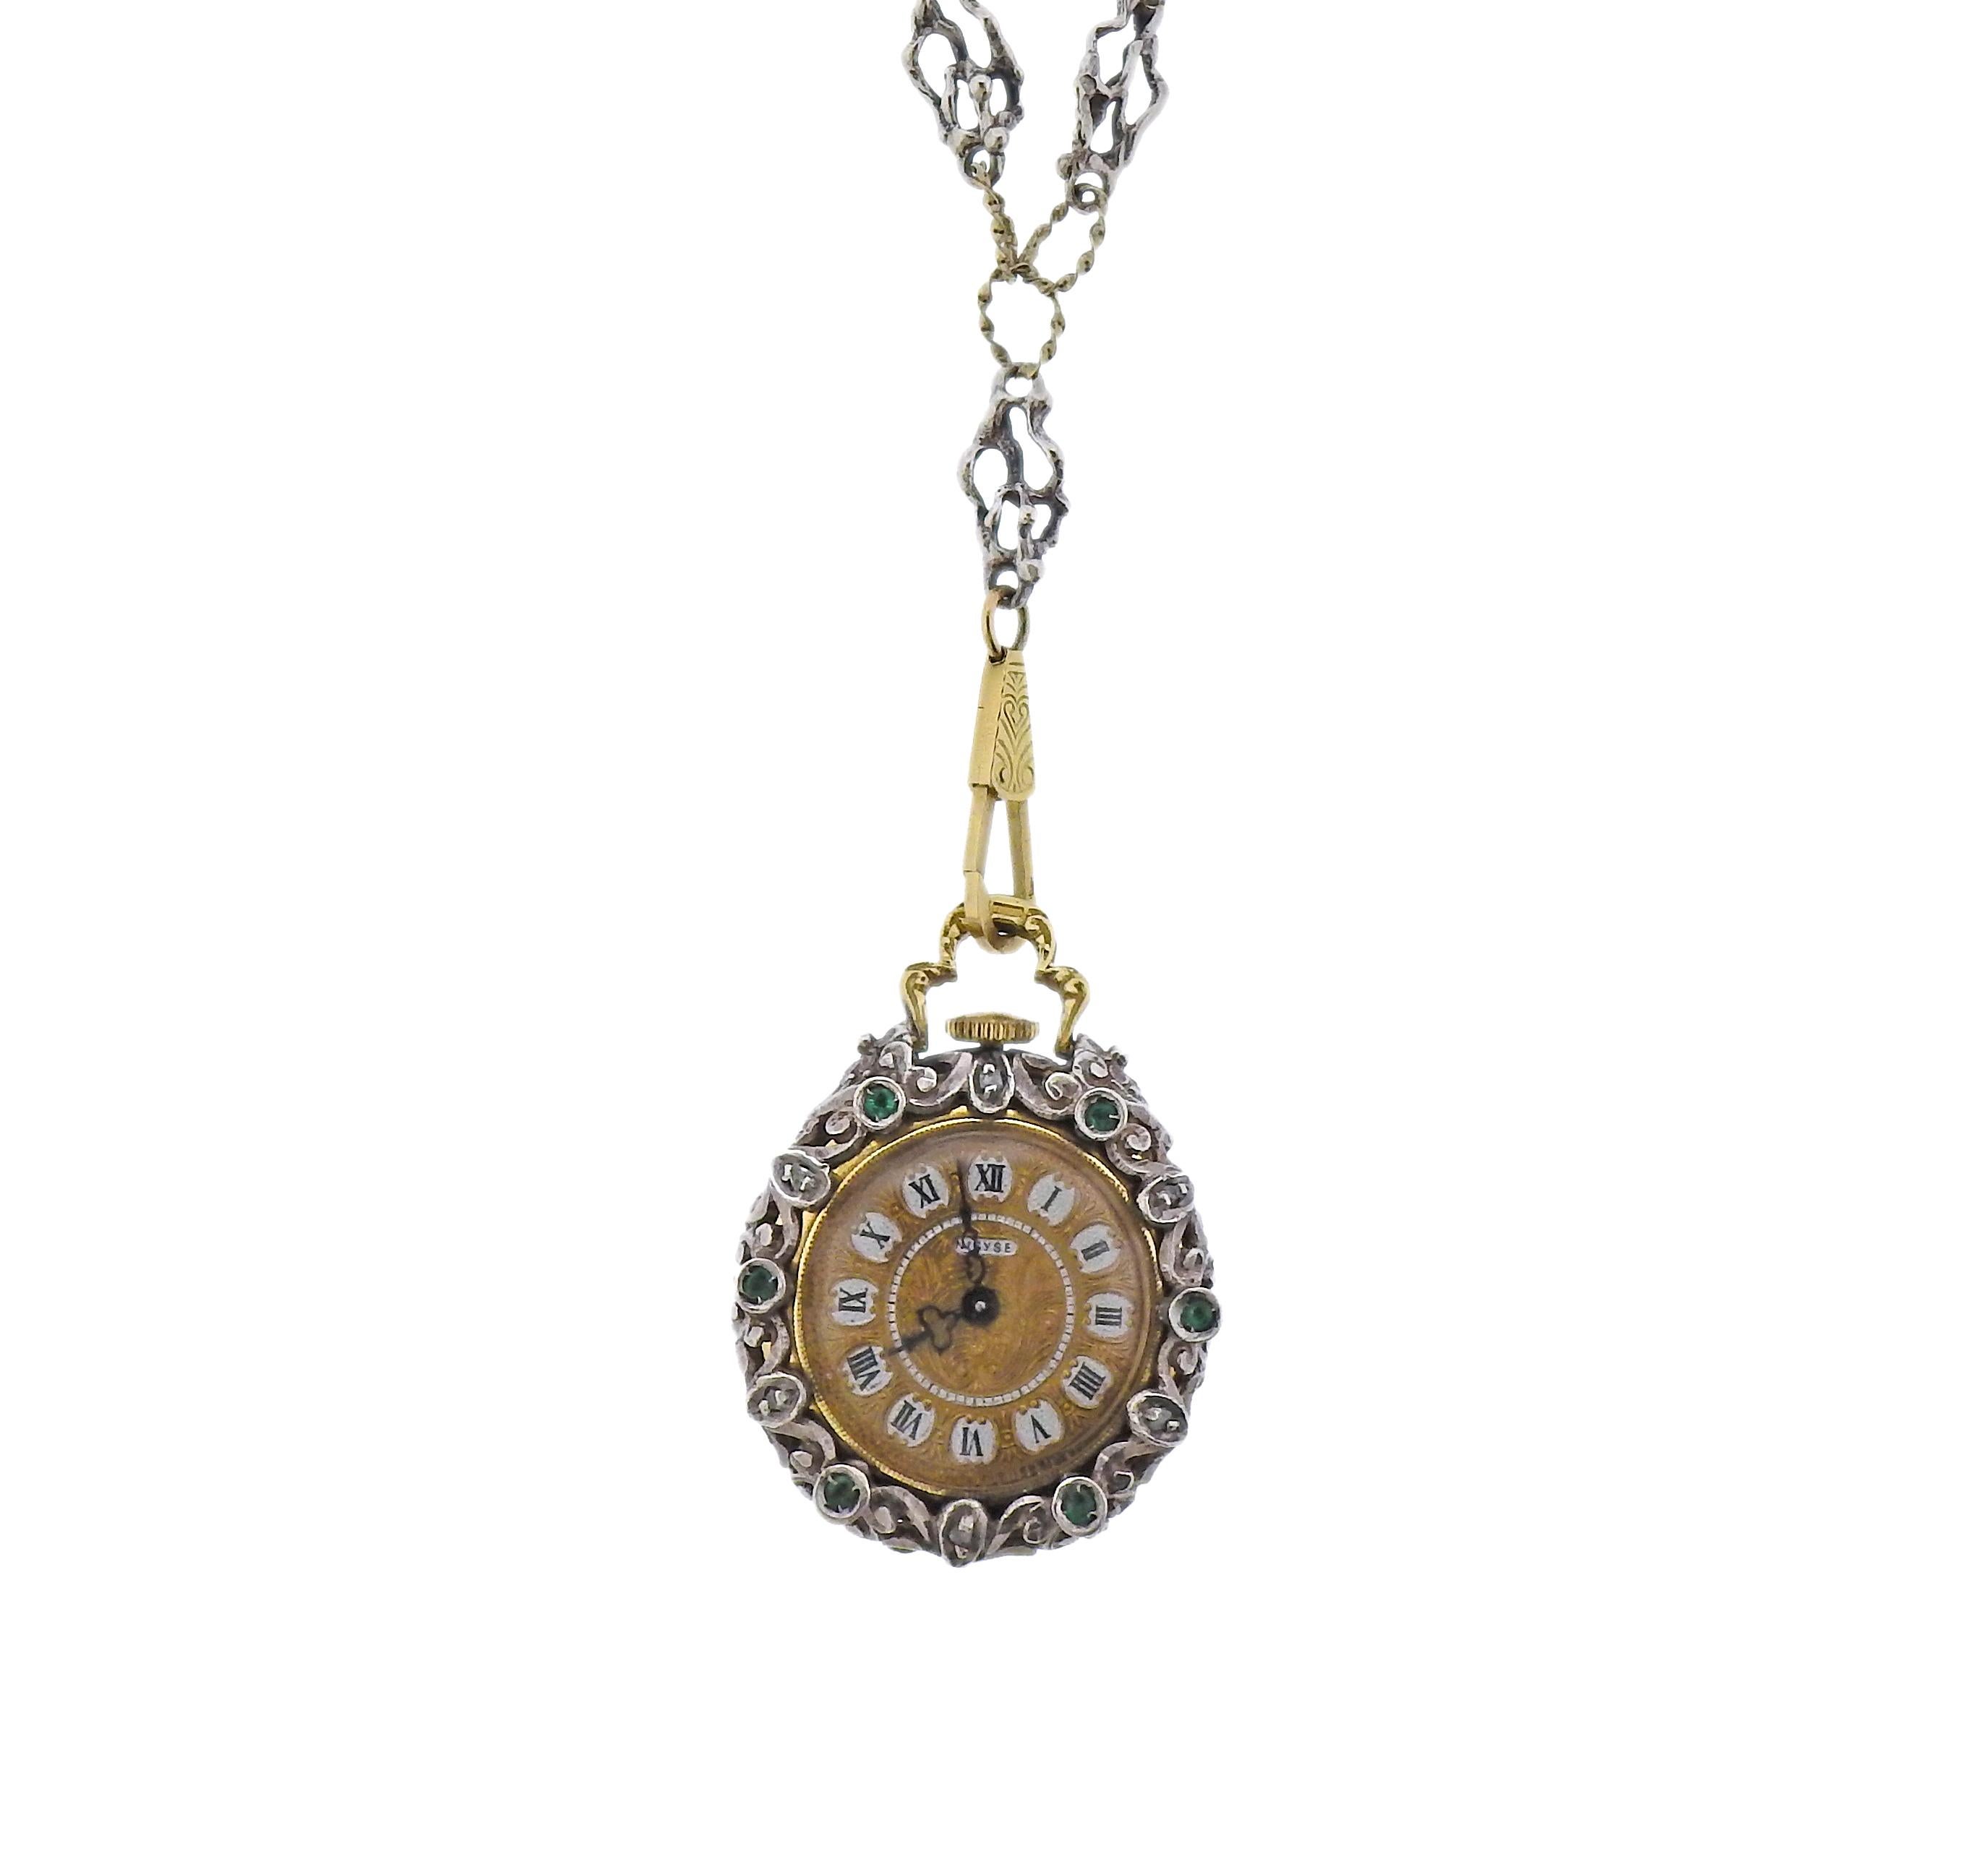 Antique silver and 14k gold chain with cage pendant, holding a pocket watch inside. Decorated with rose cut diamonds, enamel and  green gemstones. Pendant is 29mm in diameter. Chain is 28